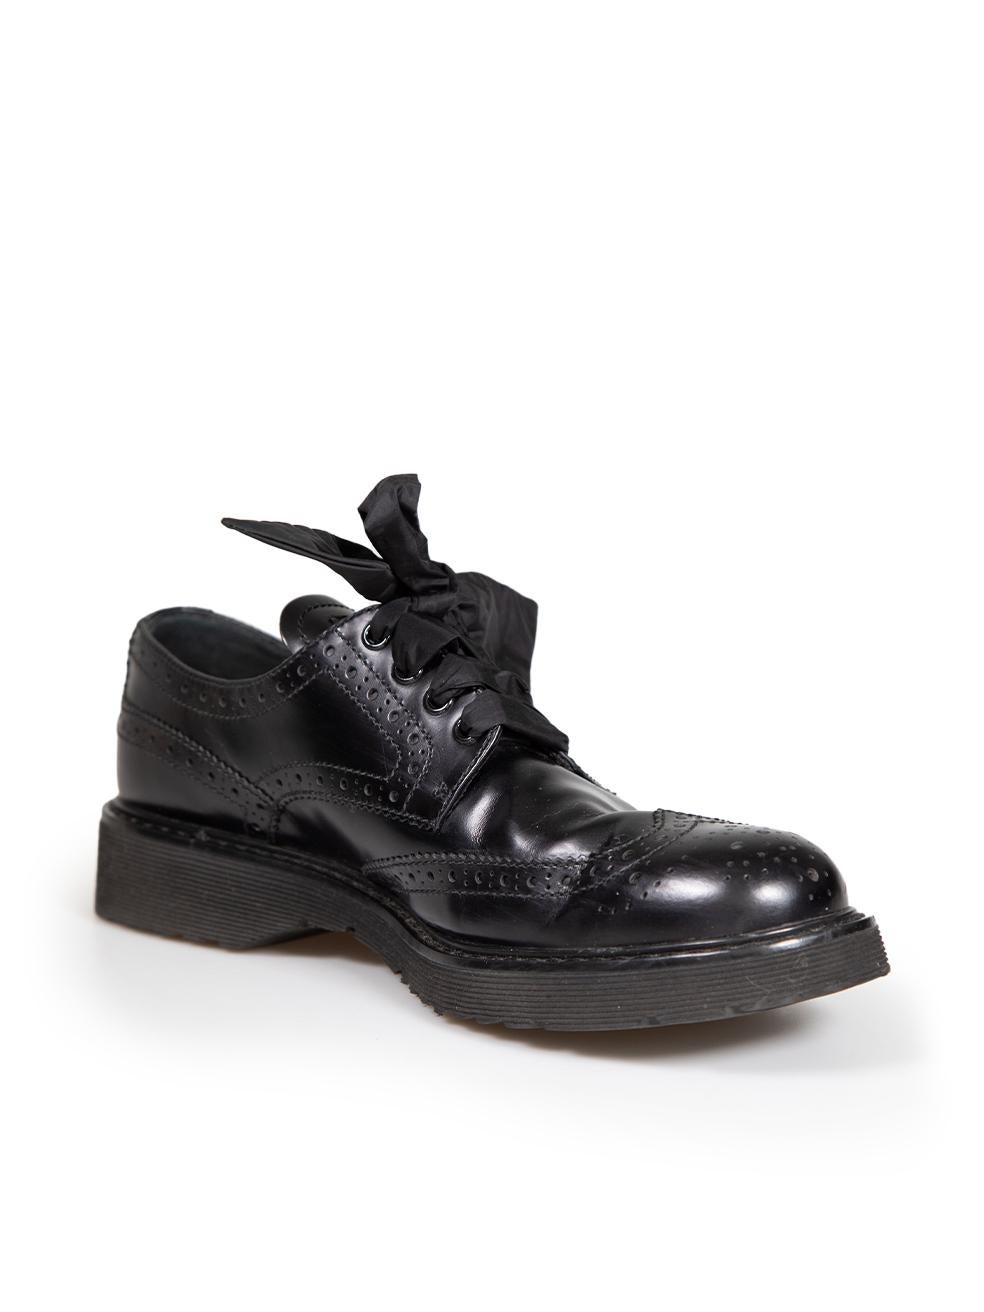 CONDITION is Very good. Minimal wear to flats is evident. Minimal discolouration and abrasion to insoles. A small scratch and abrasion is seen to the left shoe on this used Prada designer resale item.
 
 
 
 Details
 
 
 Black
 
 Leather
 
 Brogues
